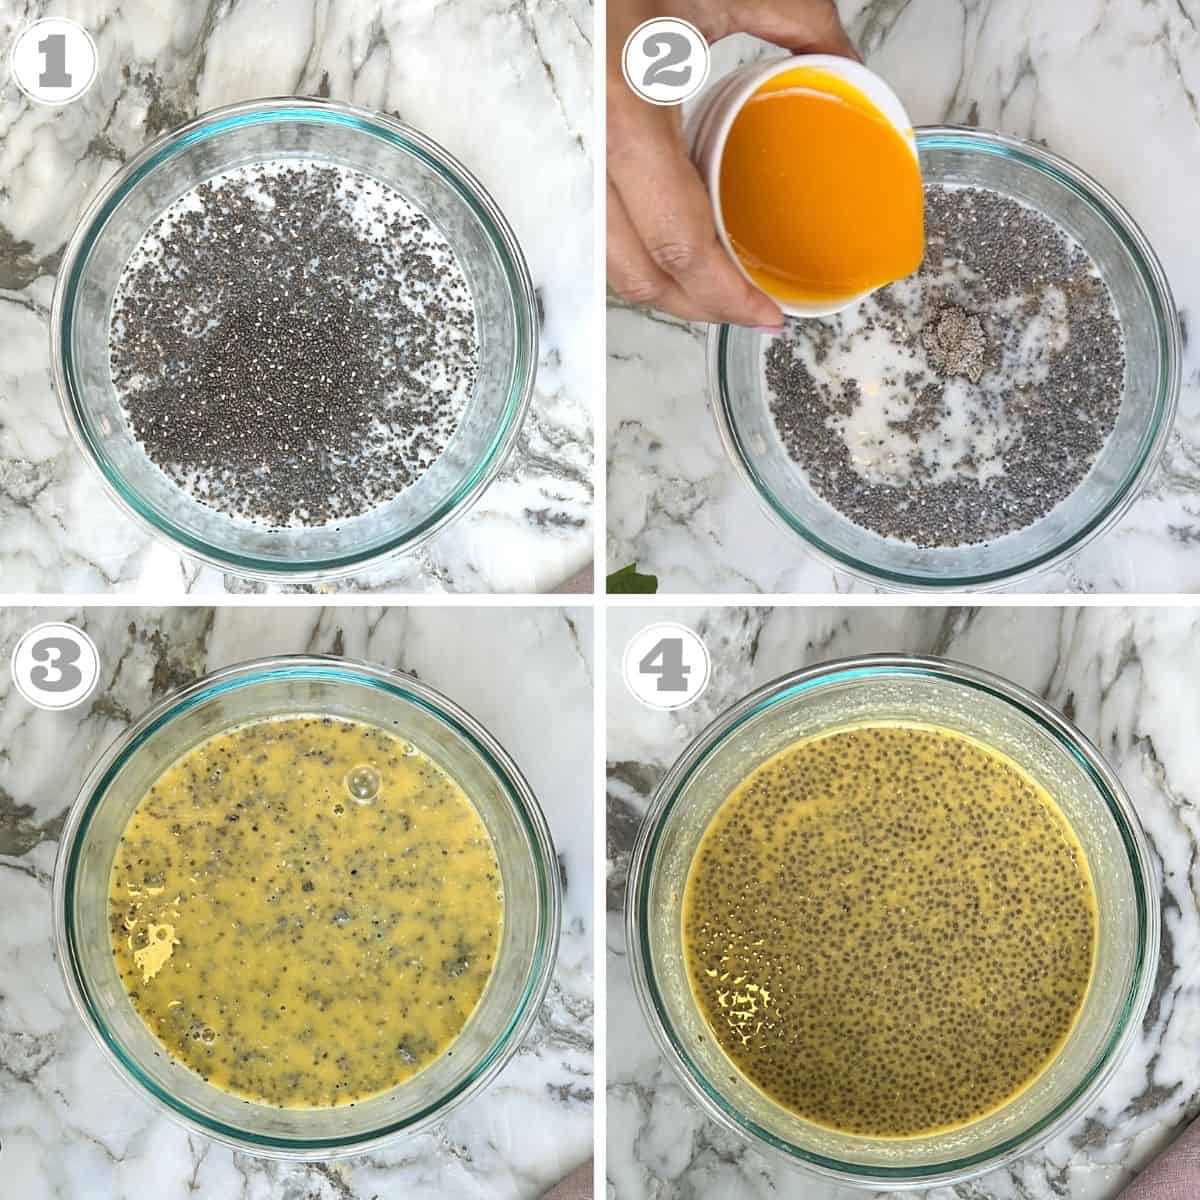 photos one through four showing how to make chia pudding 